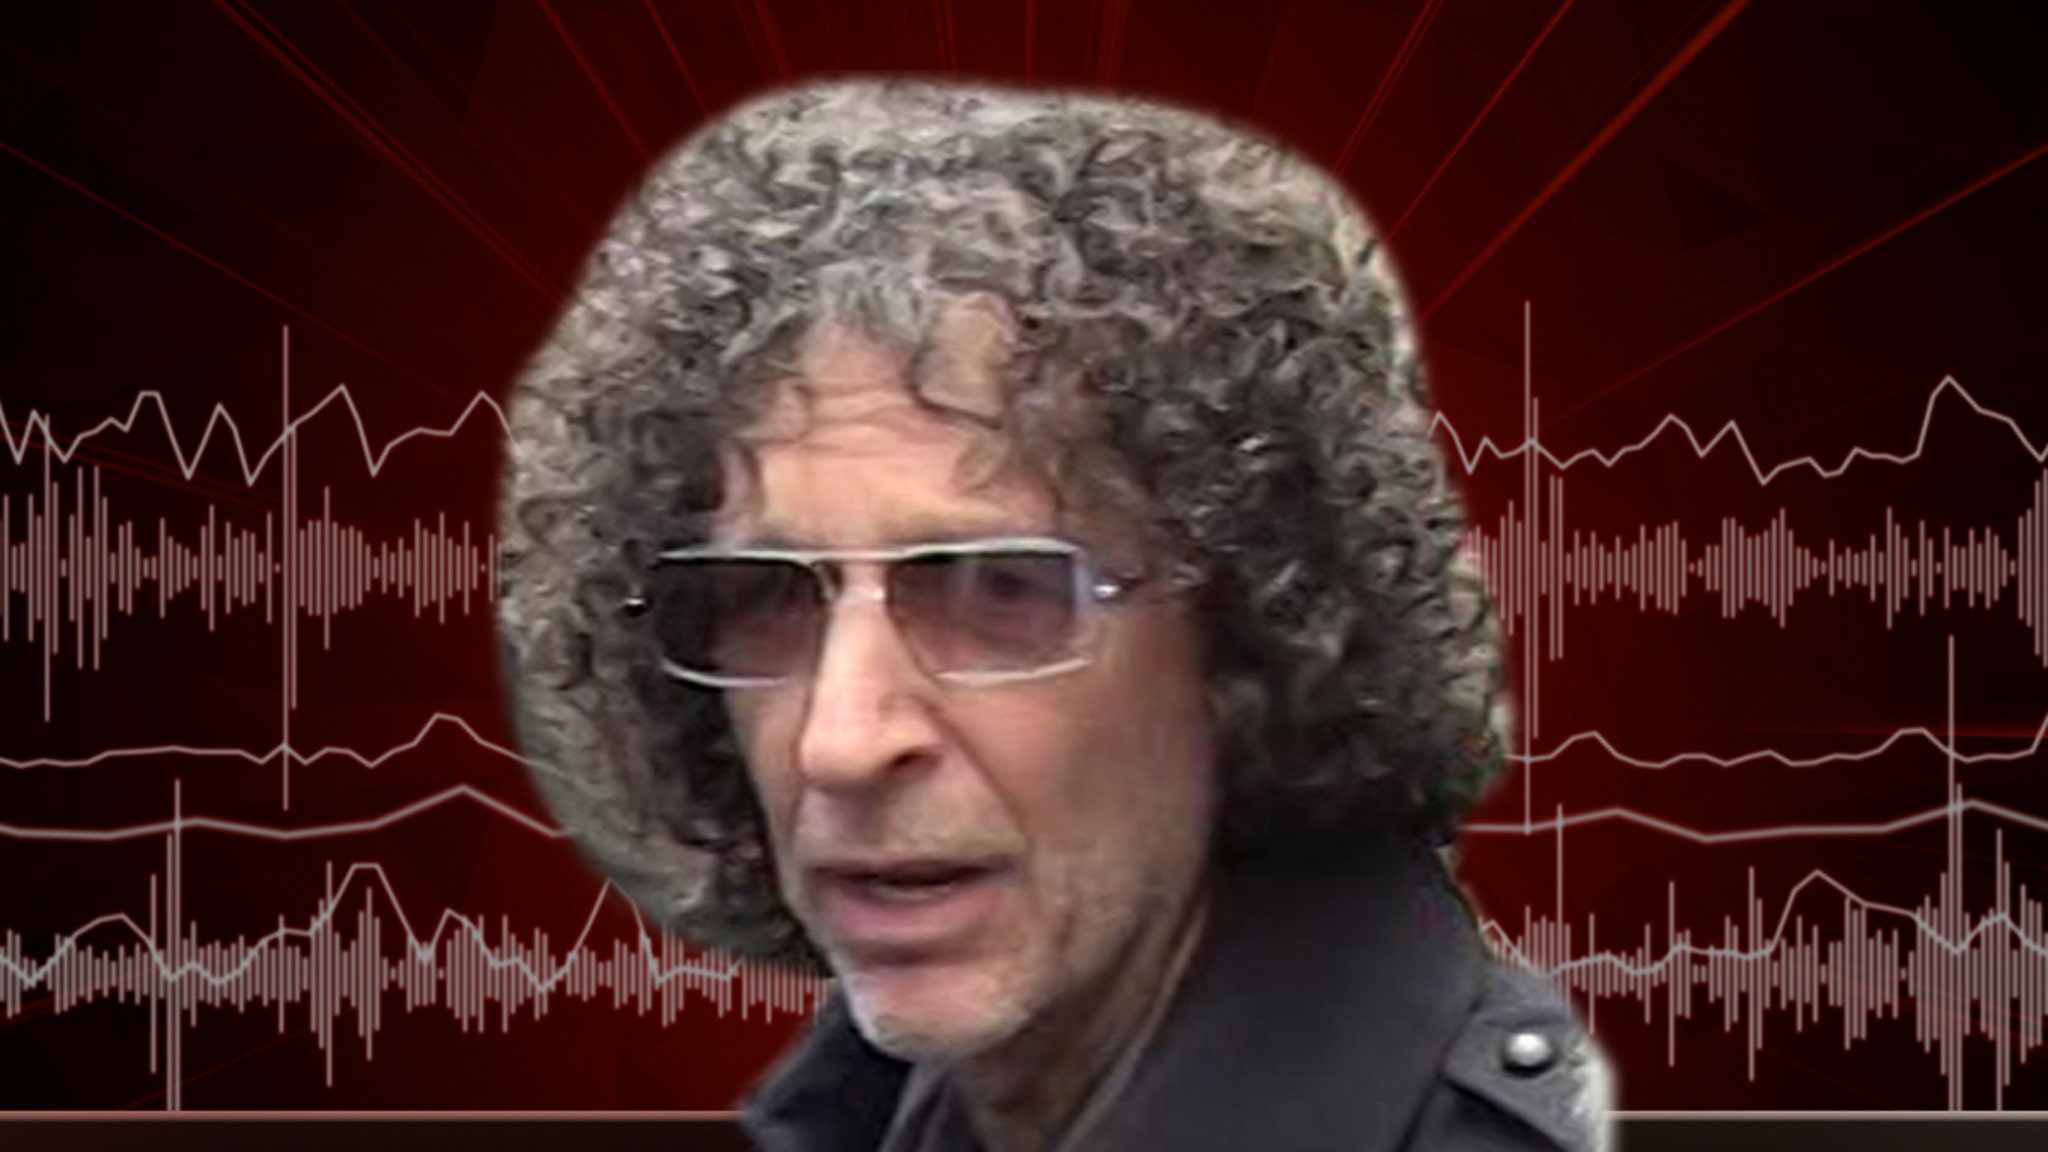 Howard Stern Says F*** Those Who Won't Get a COVID Vaccine